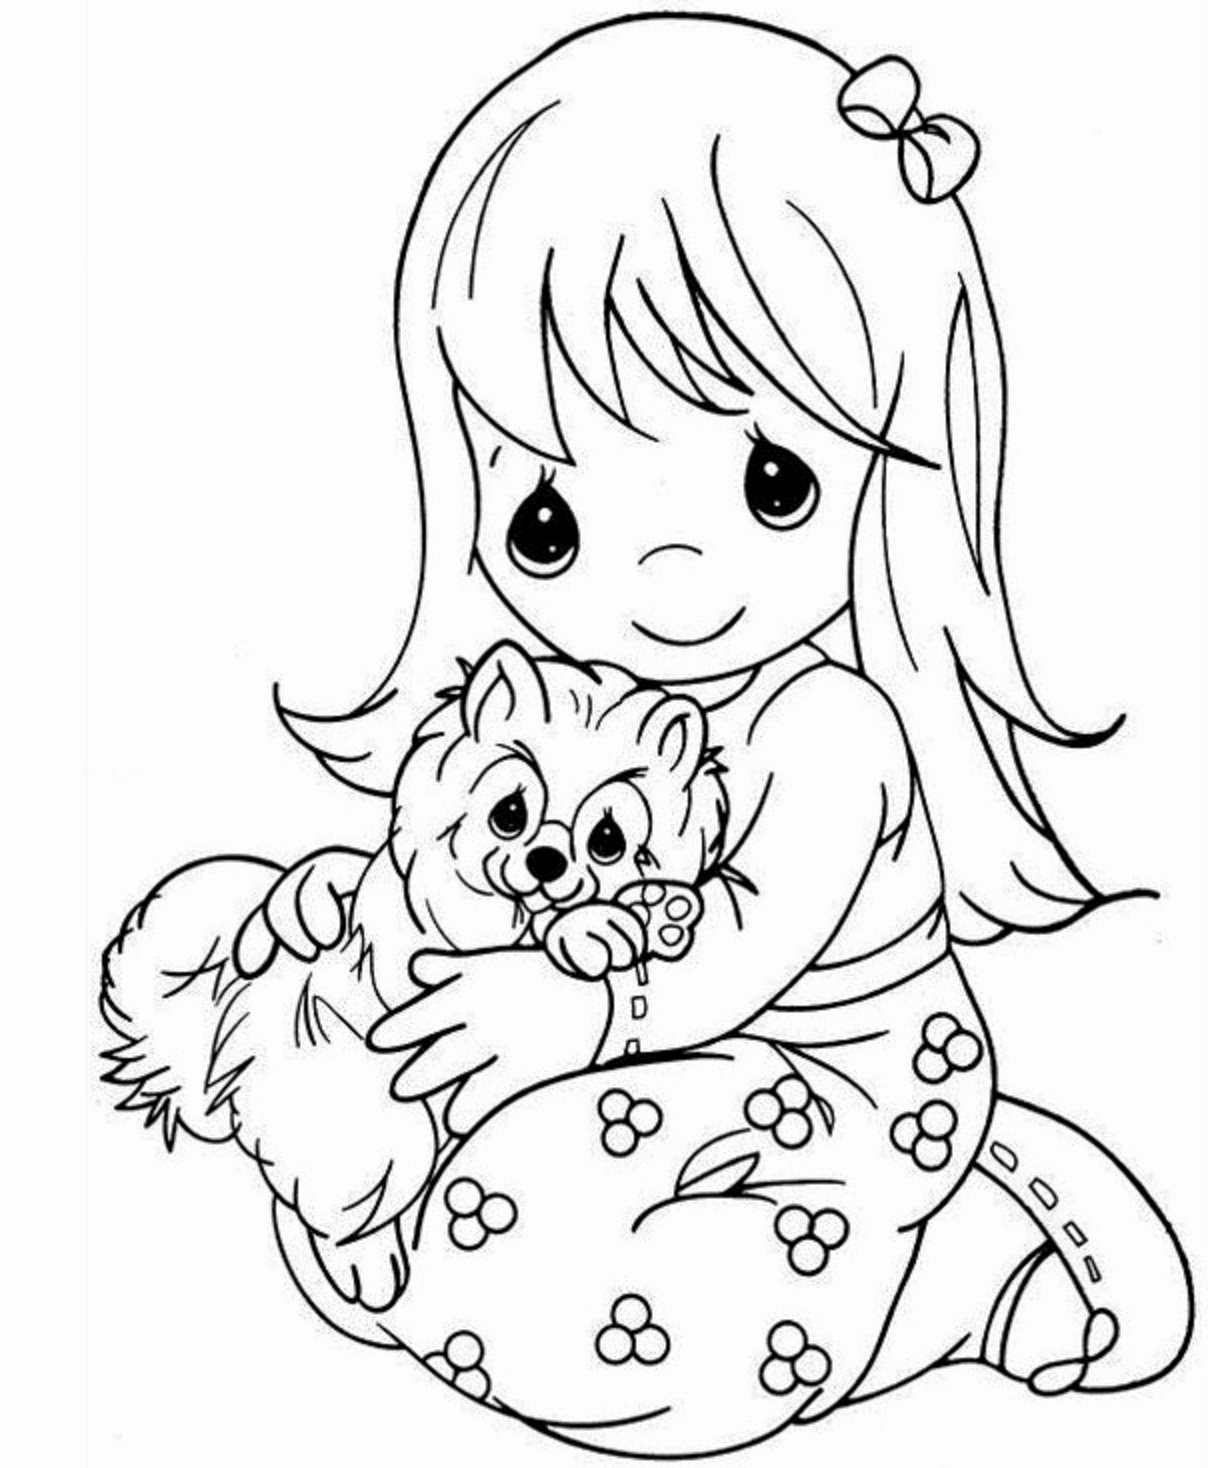 Bathroom Design Outstanding Drawing And Coloring Pages Jojo Siwa Coloring Pages 846x1095 Wallpaper Teahub Io